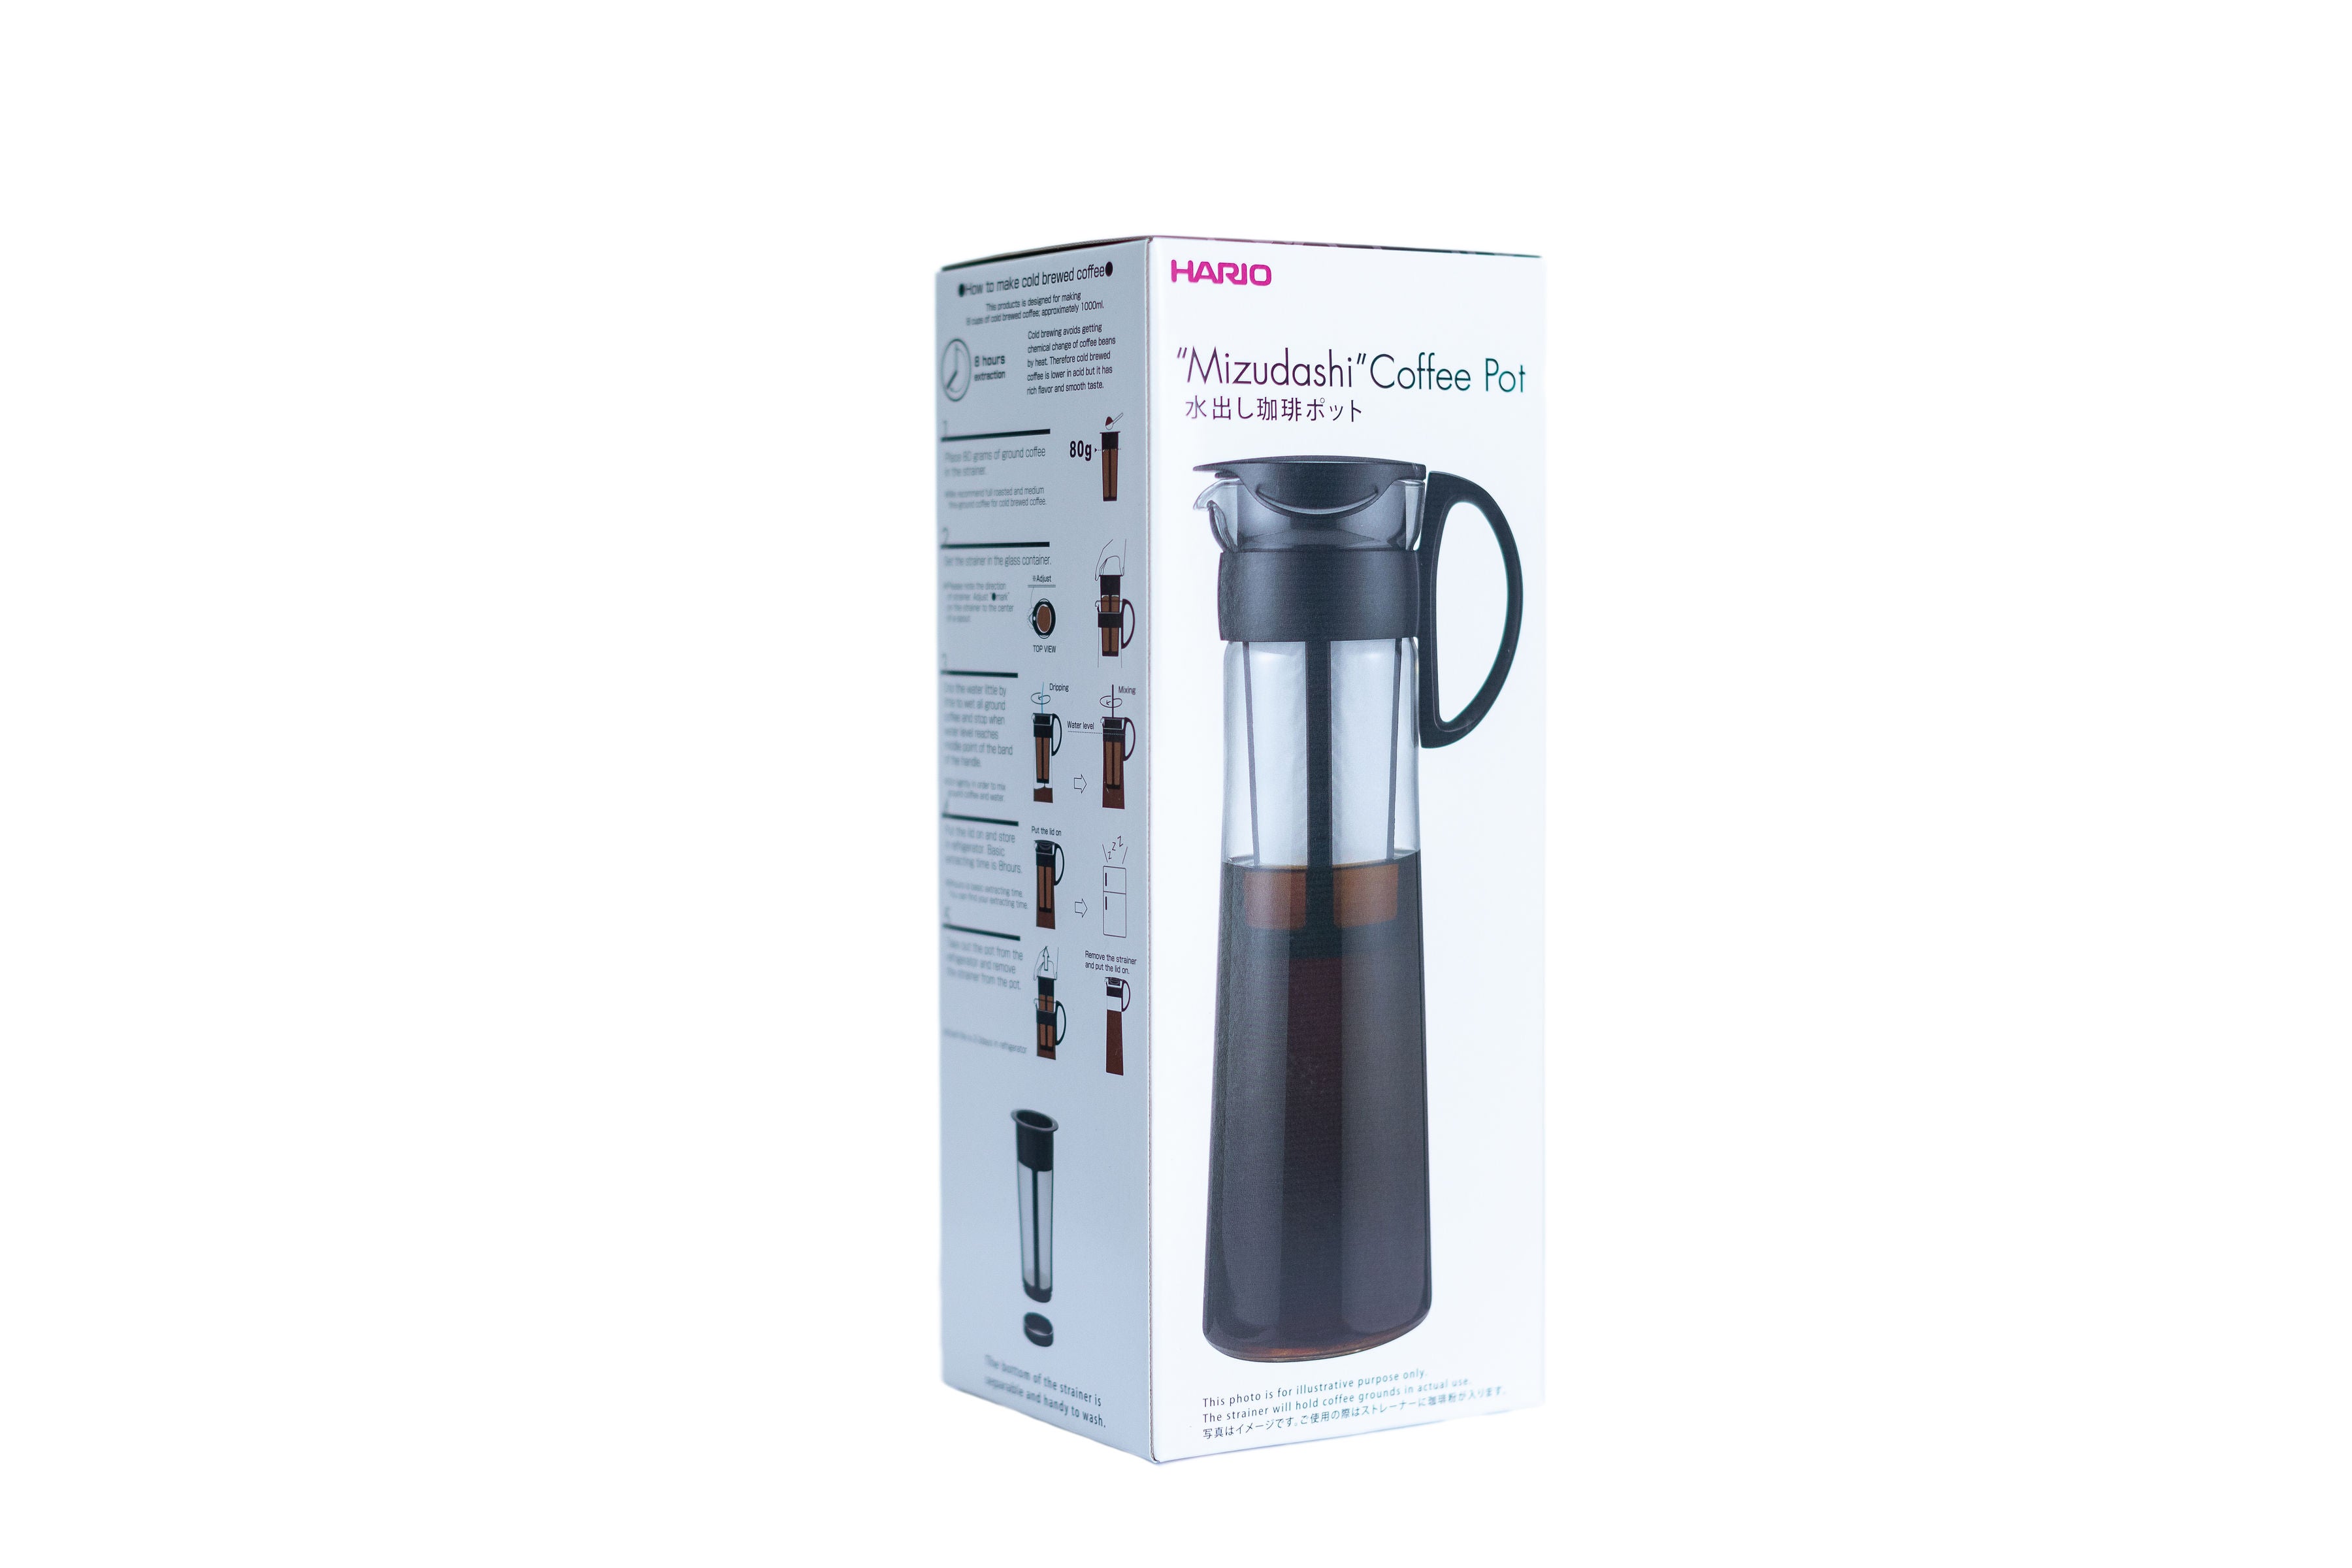 Hario Mizudashi Cold Brew Coffee Pot - 1 Litre - Pot Made from Heat Proof Glass & Dishwasher Safe. Available at Old Quarter Coffee Merchants in Ballina NSW - Best Australian Wholesale Specialty Coffee Roasted in Ballina Australia - Rare Organic Specialty Coffee from Southeast Asia